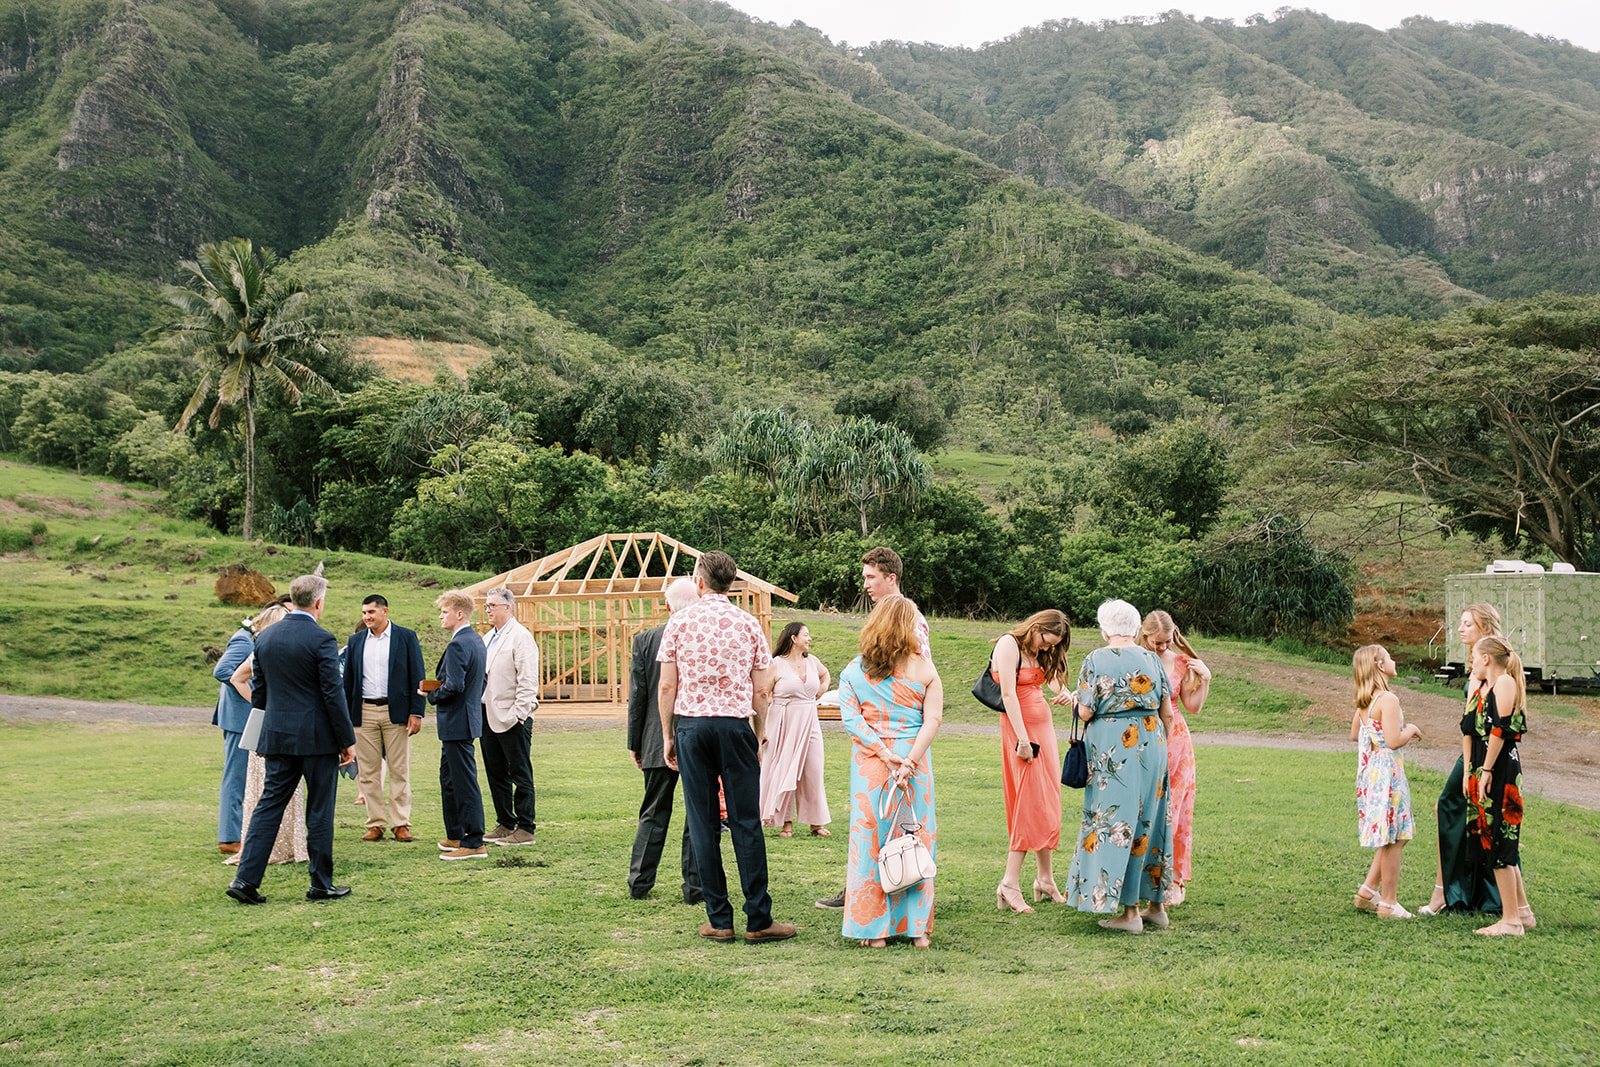 A group of people standing in a grassy field during a wedding with mountains in the background.